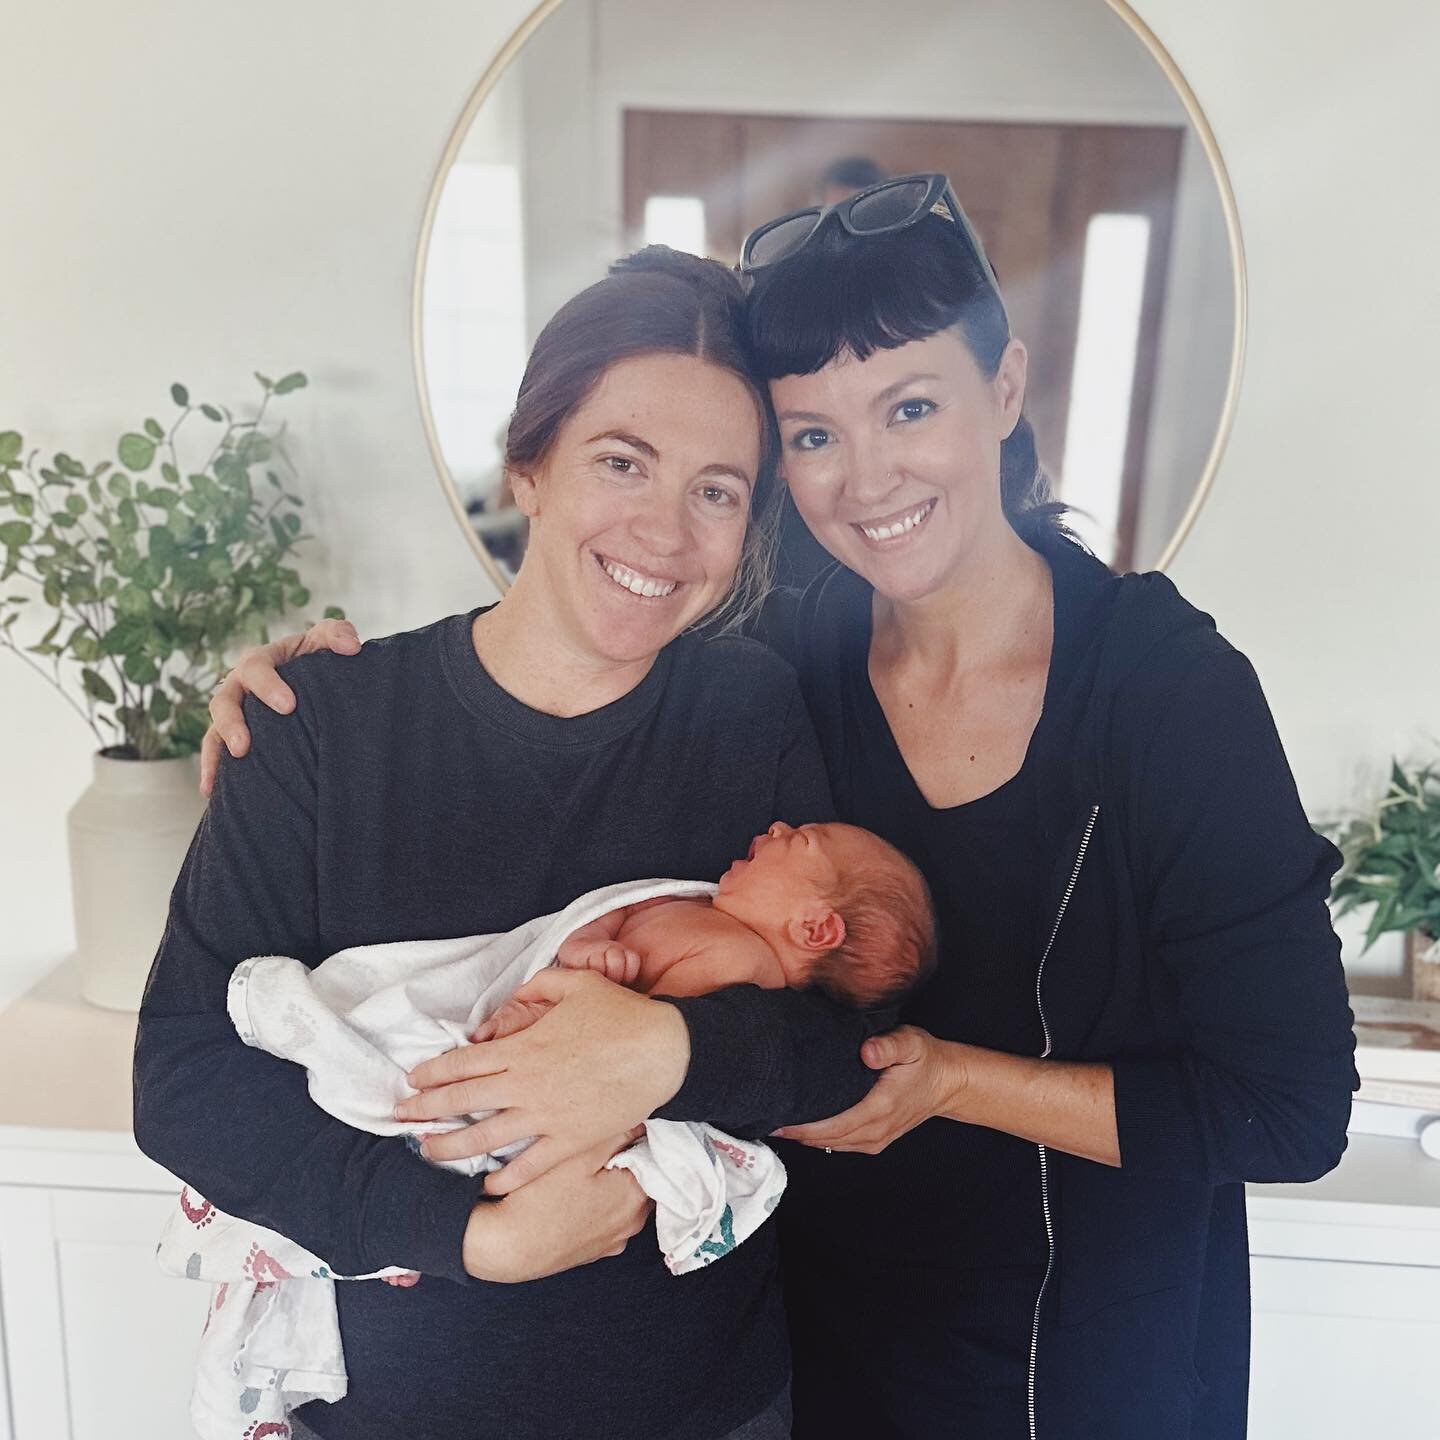 &ldquo;So we&rsquo;re family now, right?&rdquo;

Yes!

The connection between a doula and their client runs so incredibly deep. It is a very special kind of bond that develops over time throughout the pregnancy and deepens profoundly during their bir